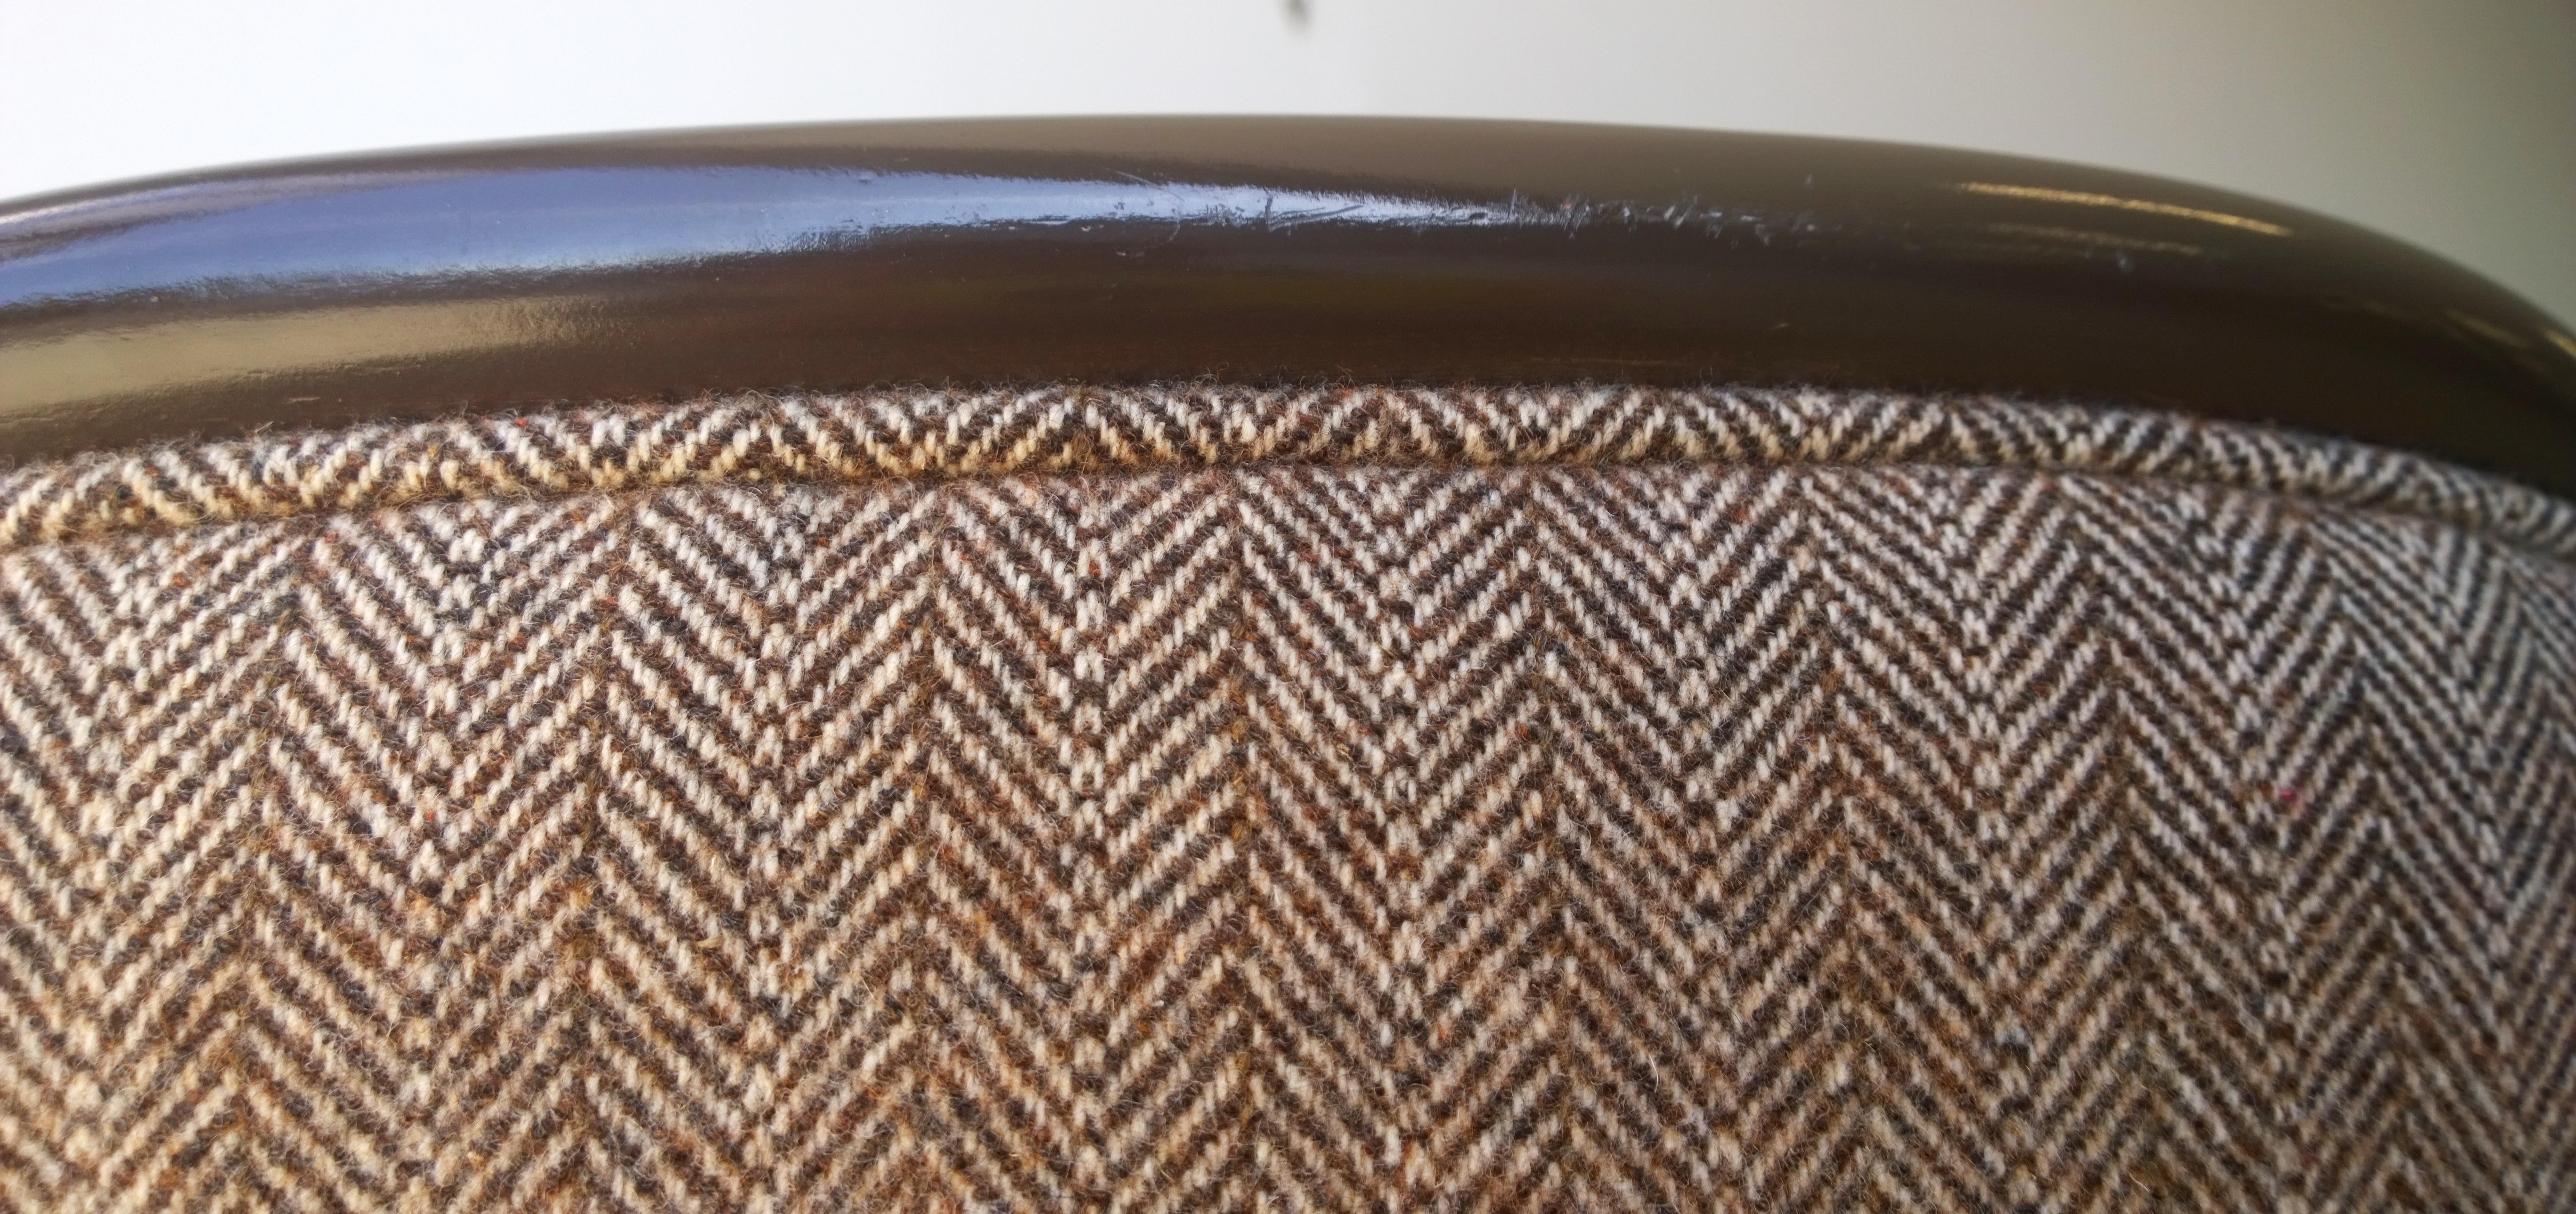 Pr of Ward Bennett Brown Lacquered Fame w/ Herringbone Wool Upholstery Armchairs For Sale 3